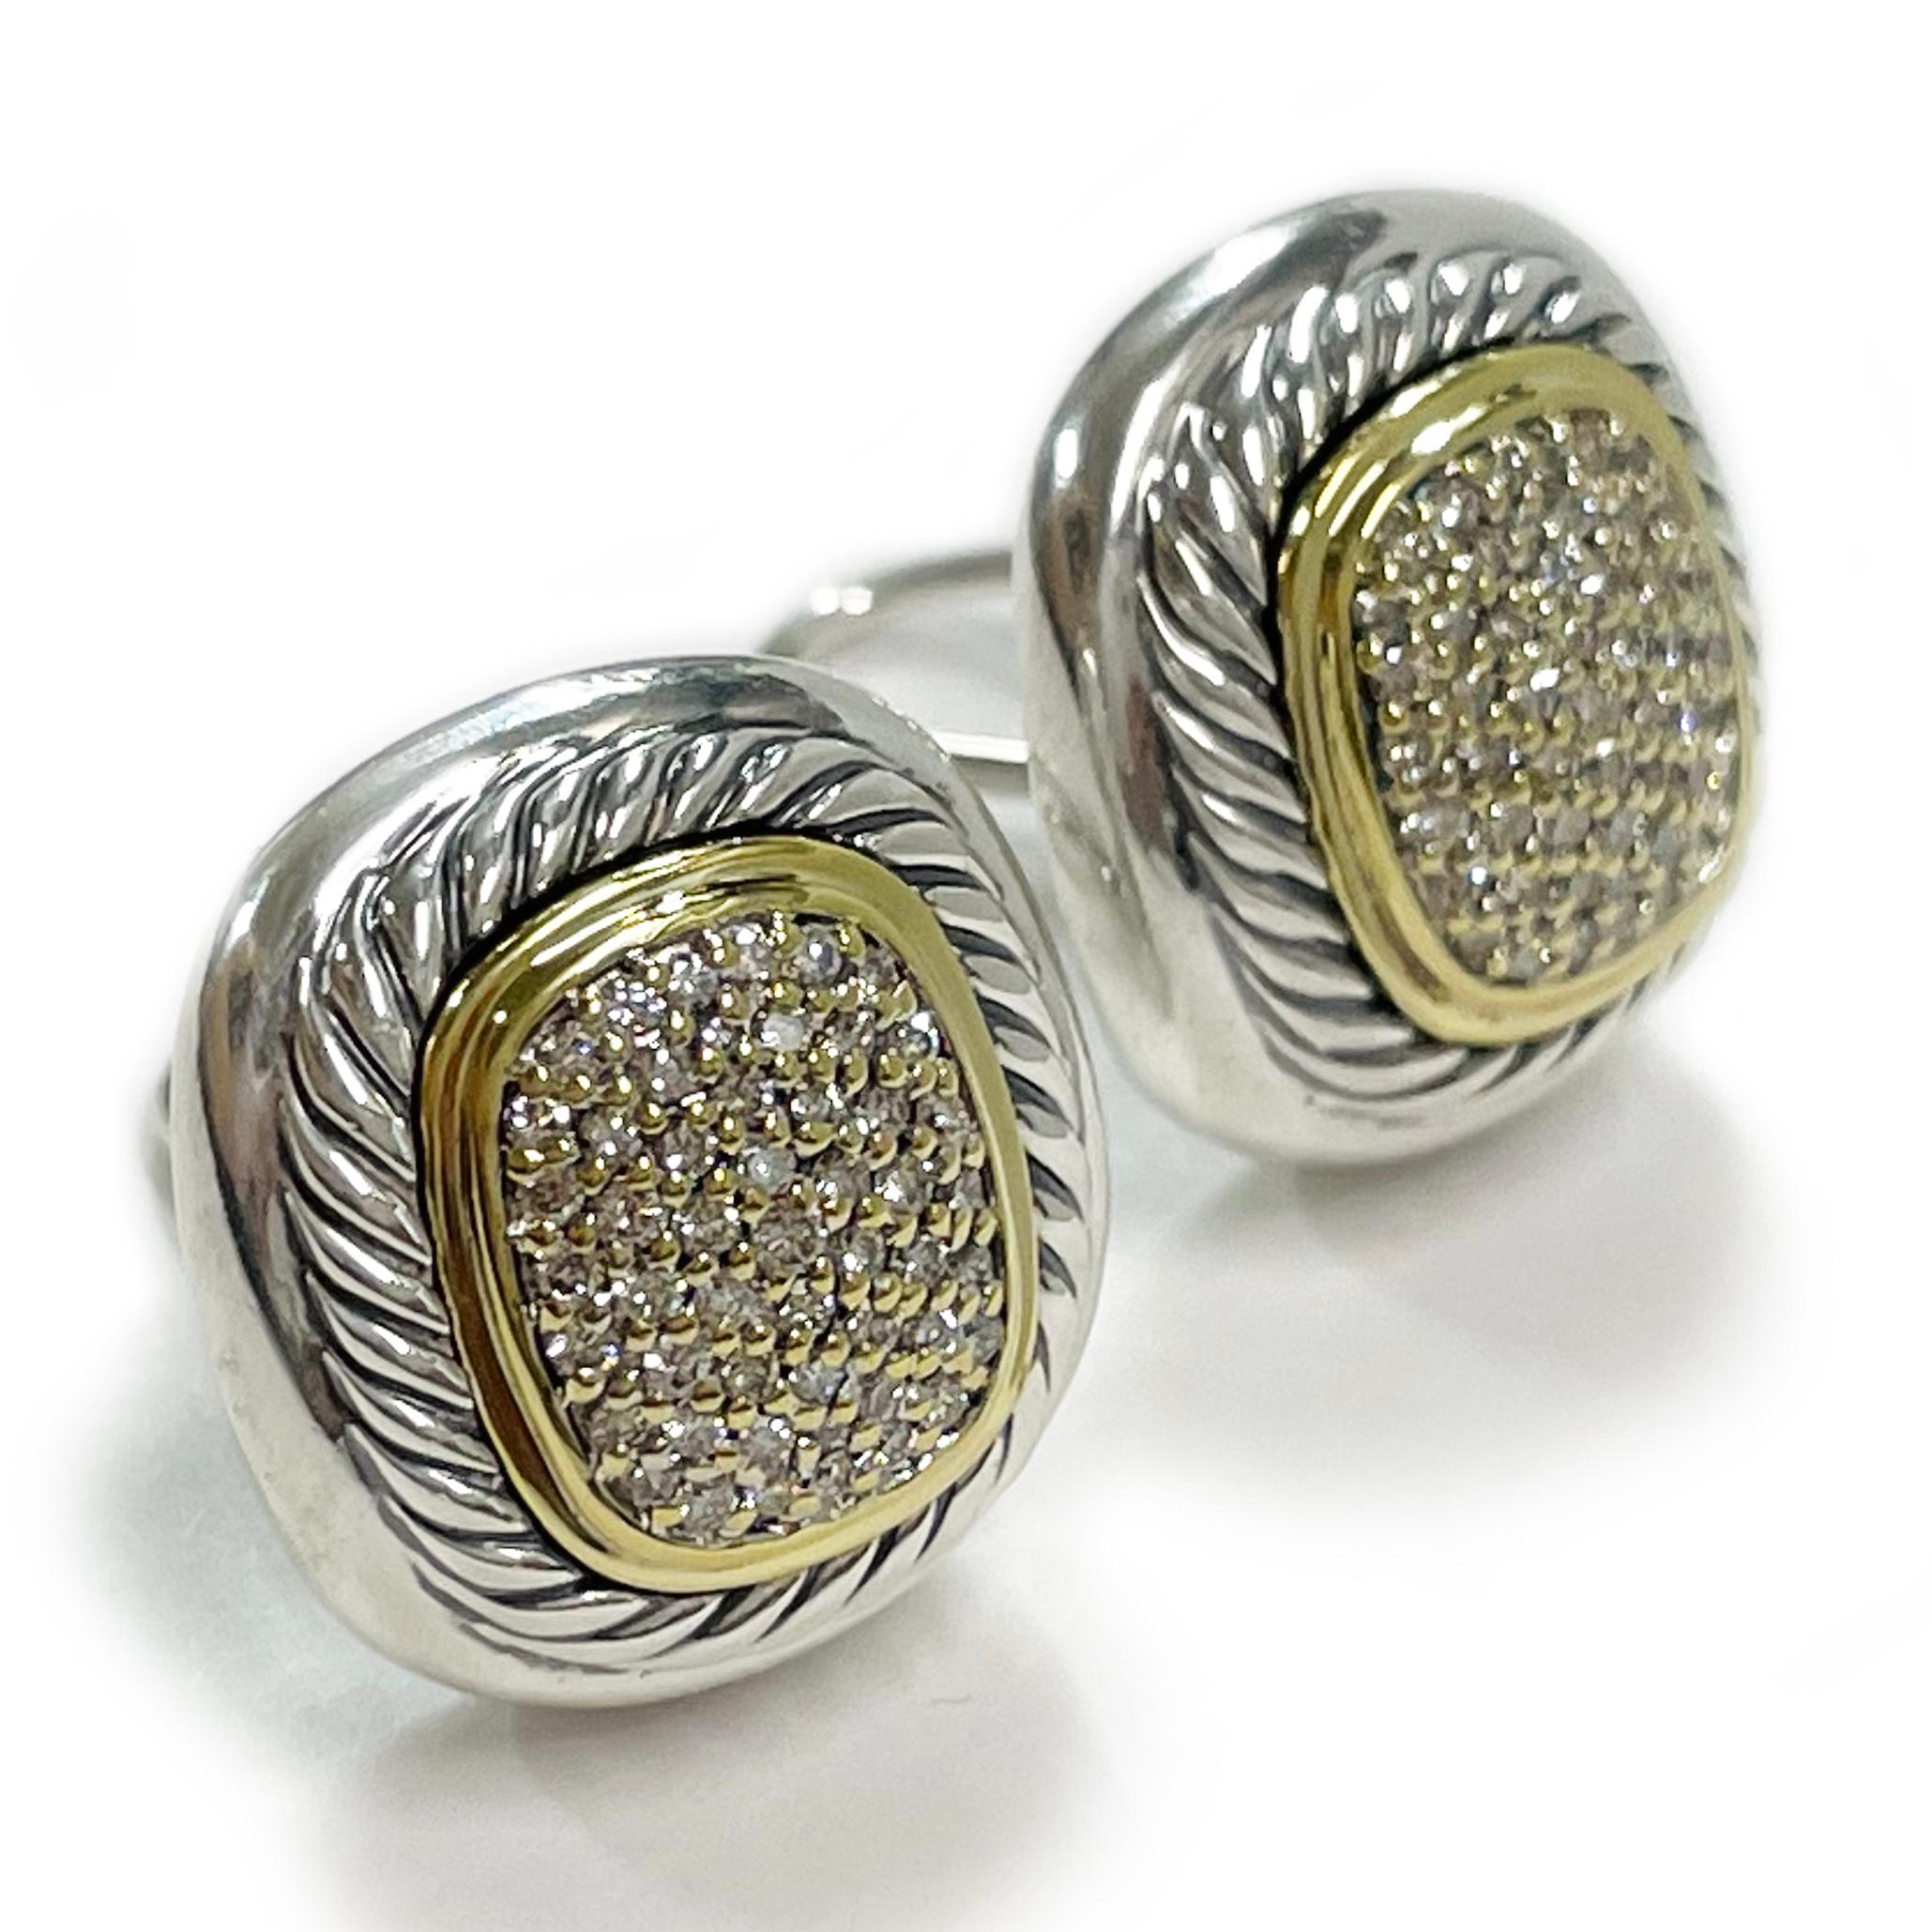 David Yurman Albion Pave Diamond Clip-On Earrings. The earrings feature a sterling silver bezel with classic Yurman cable surround, a dual 14 karat yellow gold detail and one hundred round pave set brilliant-cut diamonds for a carat total weight of